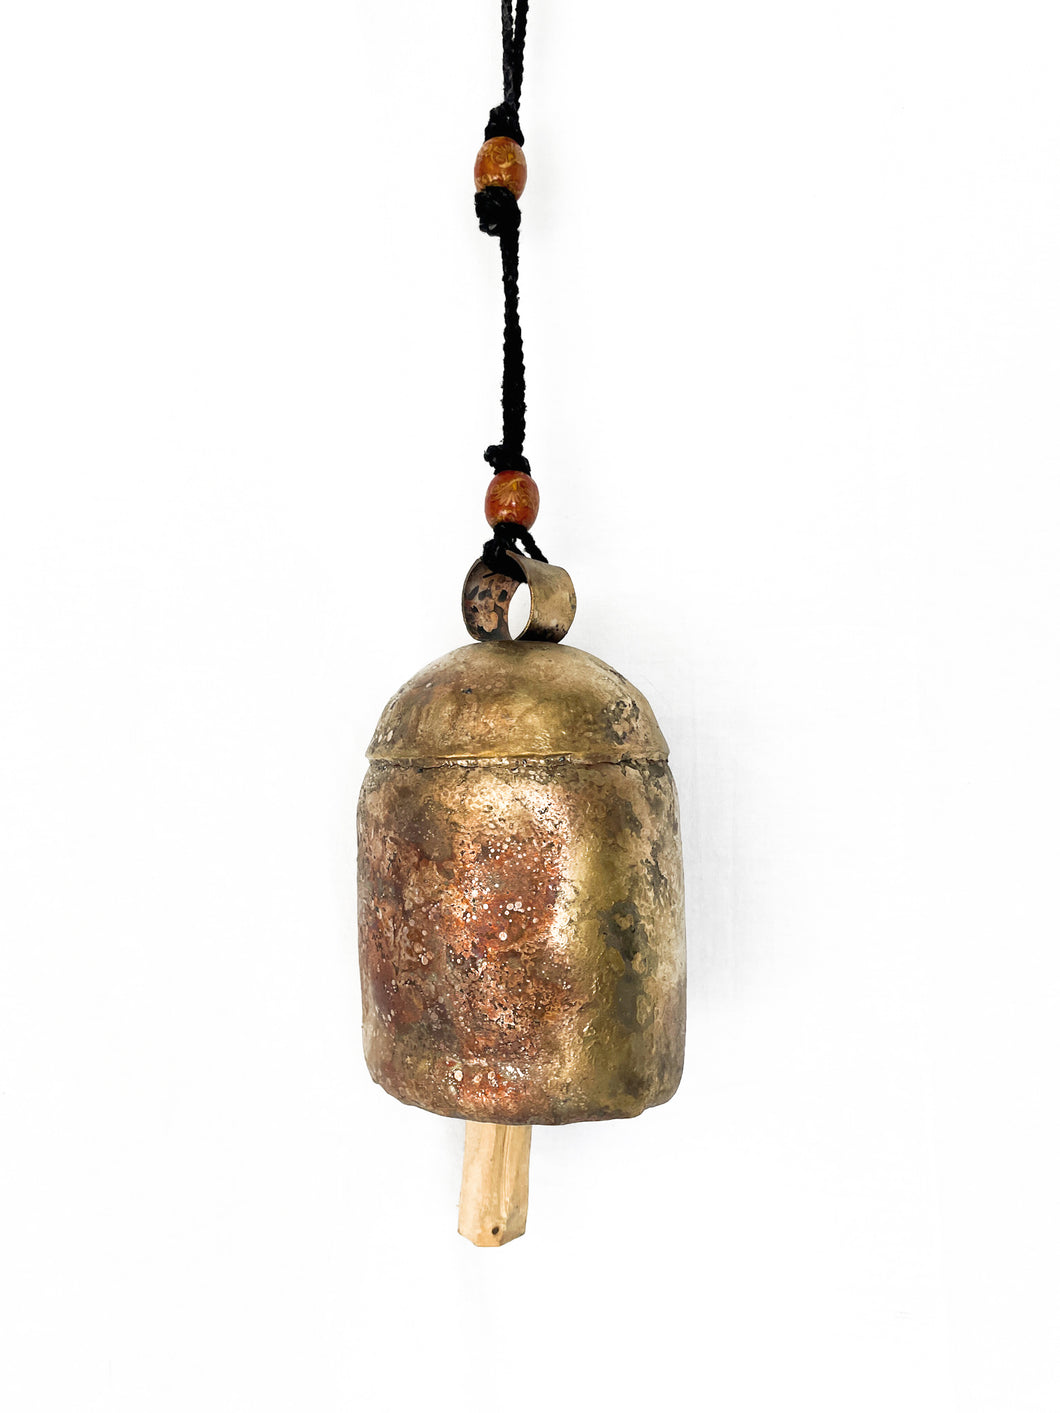 Solo Copper Bell - Large #10